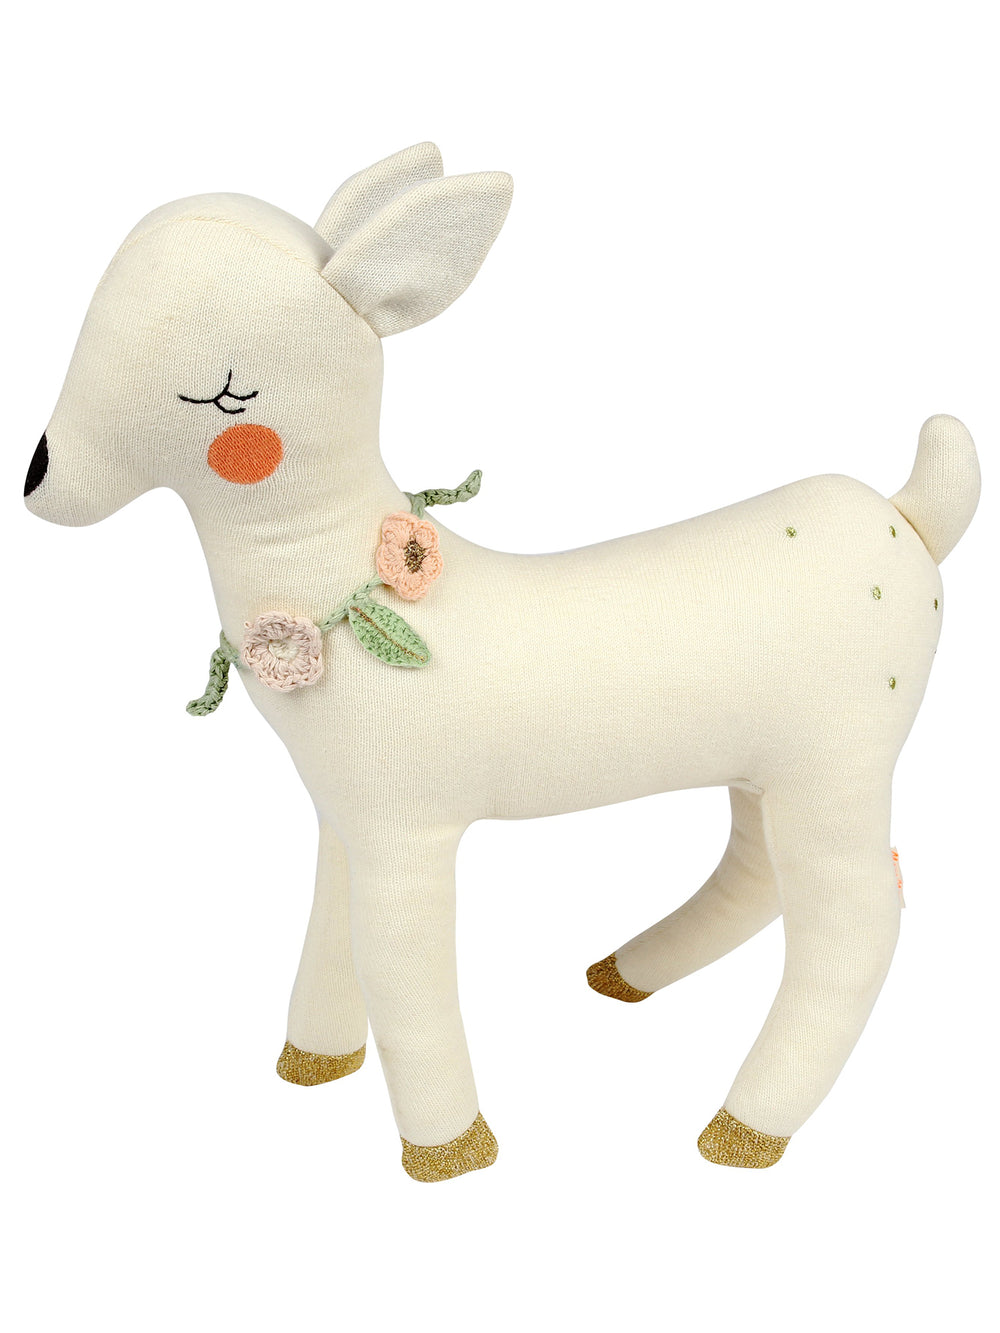 Blossom a baby toy deer made from knitted organic cotton with adorable stitched features, gold hooves and a beautiful crochet flower necklace Product dimensions: 13.5 x 13.75 inches